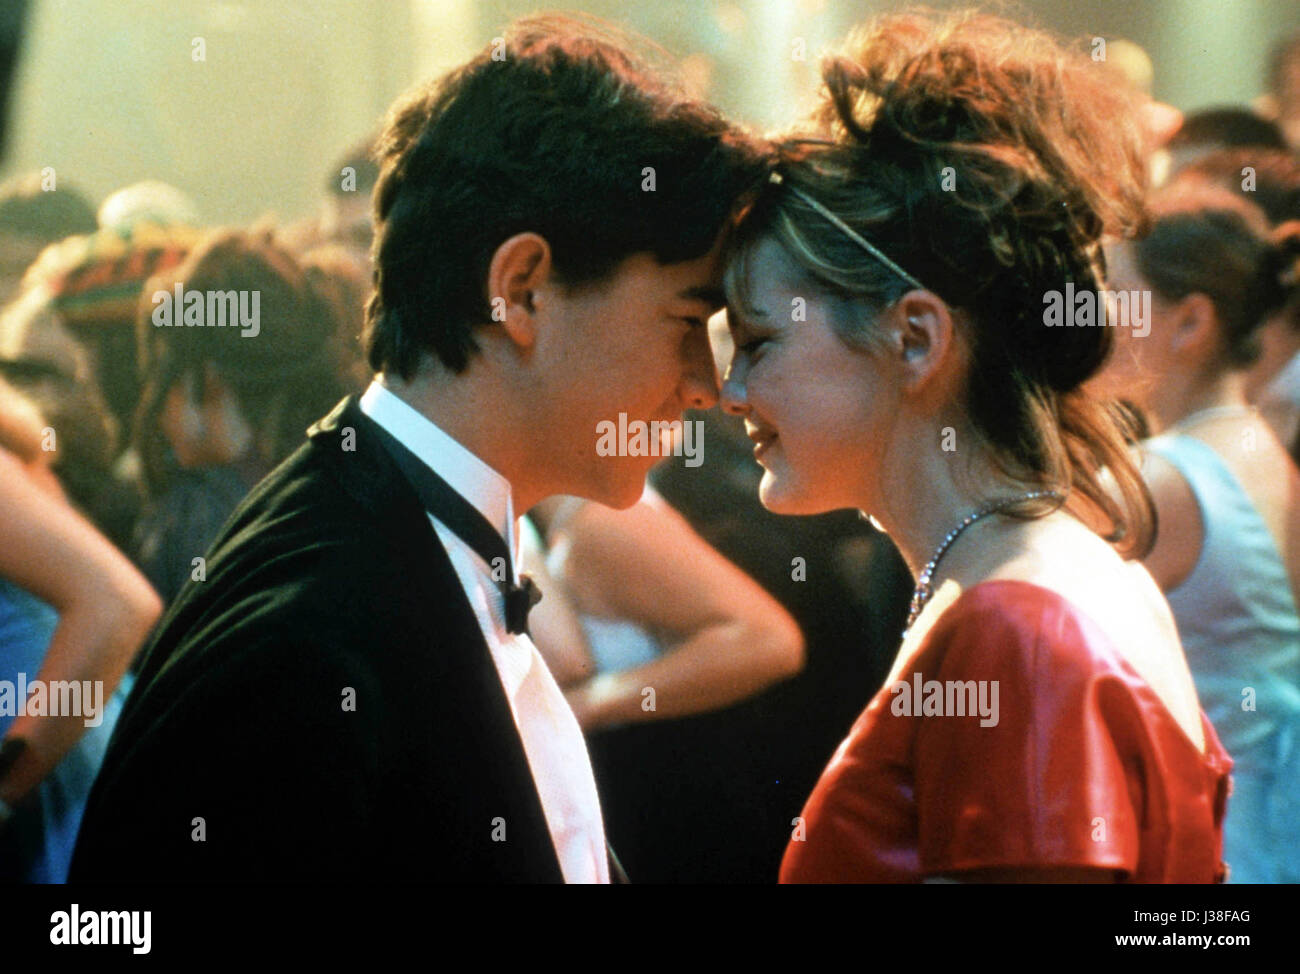 10 THINGS I HATE ABOUT YOU (1999)  JOSEPH GORDON-LEVITT  LARISA OLEYNIK  GIL YUNGER (DIR)  TOUCHSTONE PICTURES/MOVIESTORE COLLECTION LTD Stock Photo